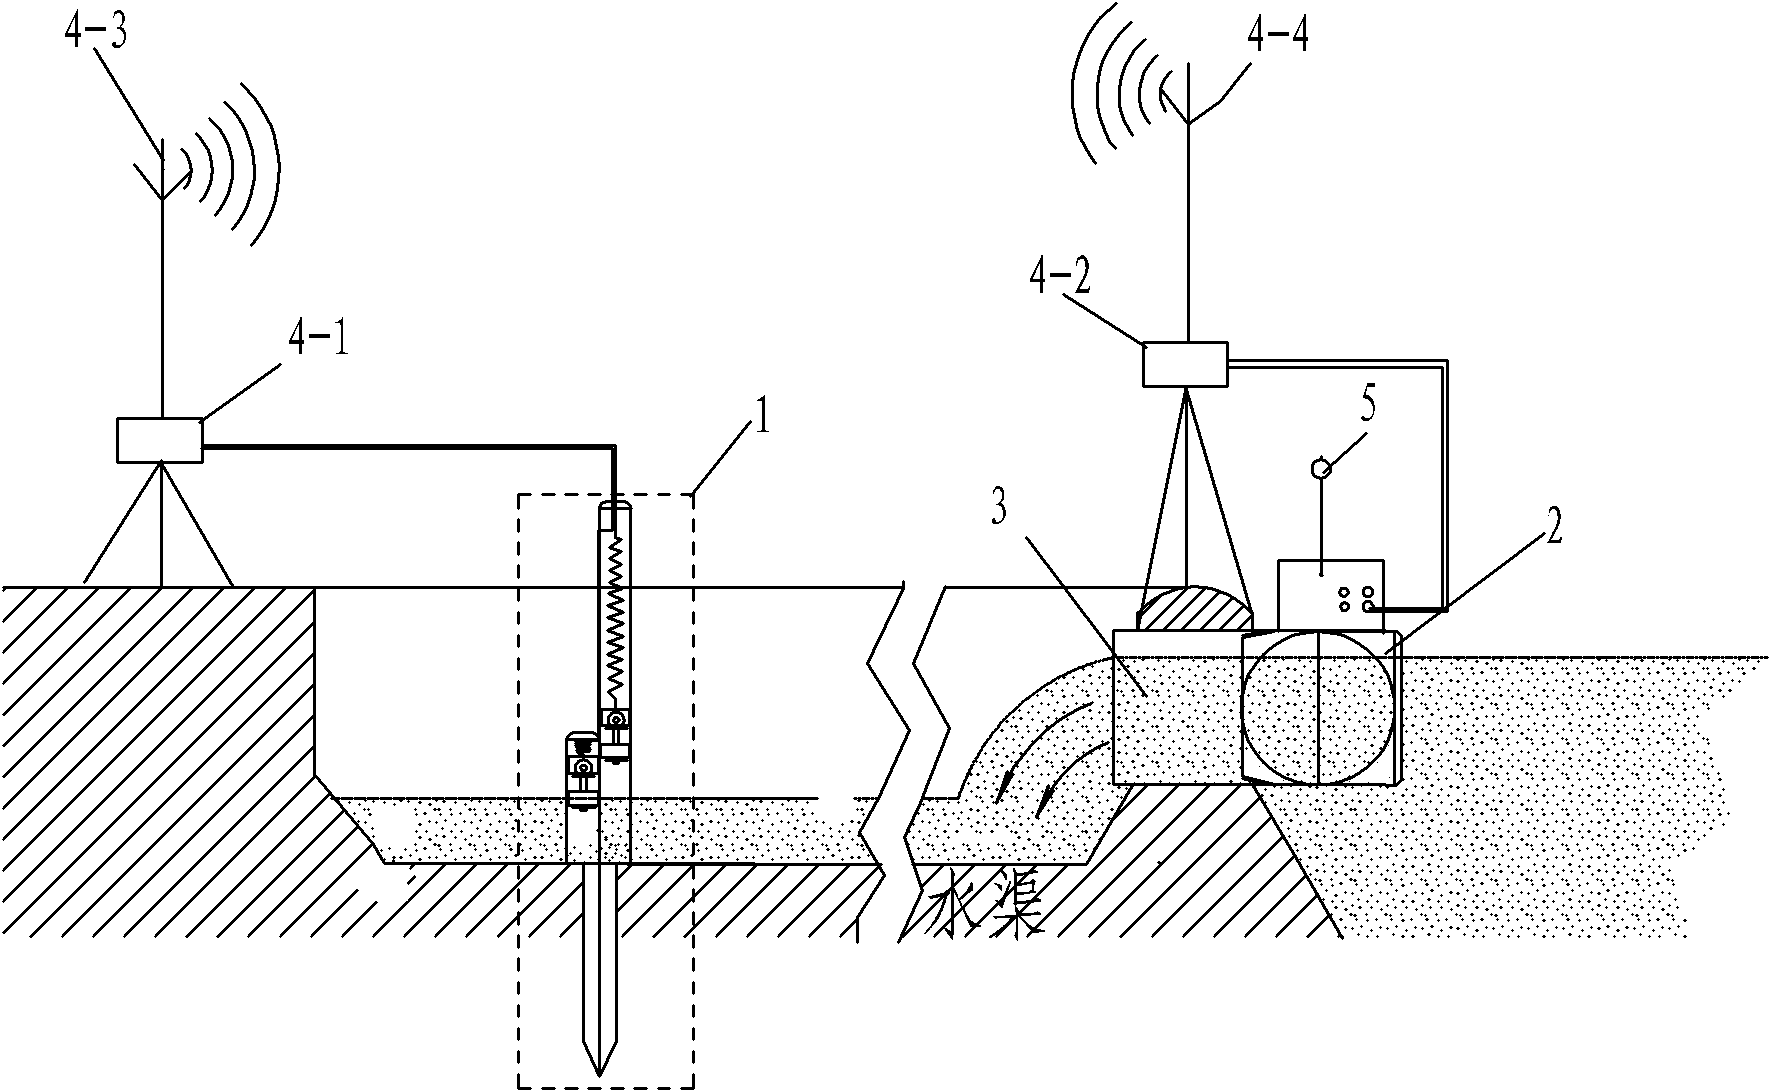 Automatic water control system for field irrigation